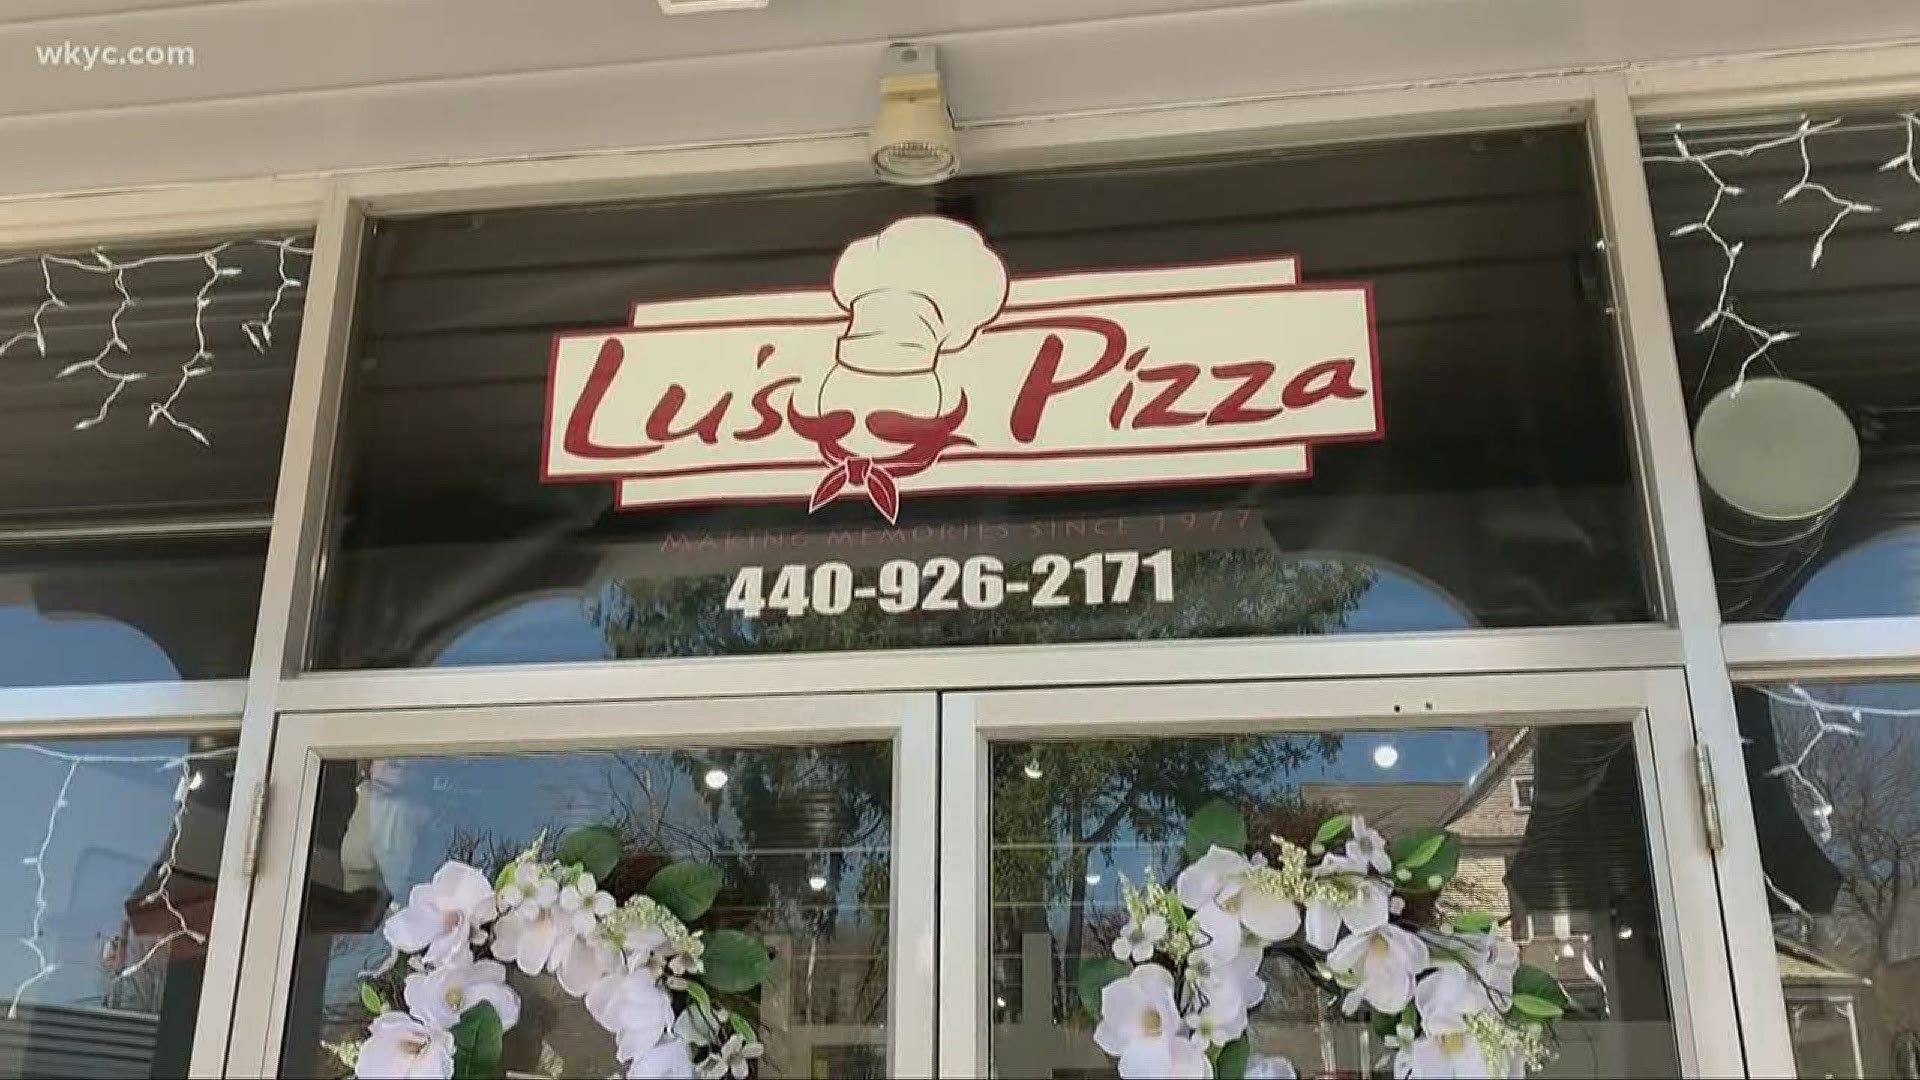 Hungry? Lu's Pizza has you covered! They are still open, but have adapted to the current coronavirus situation.